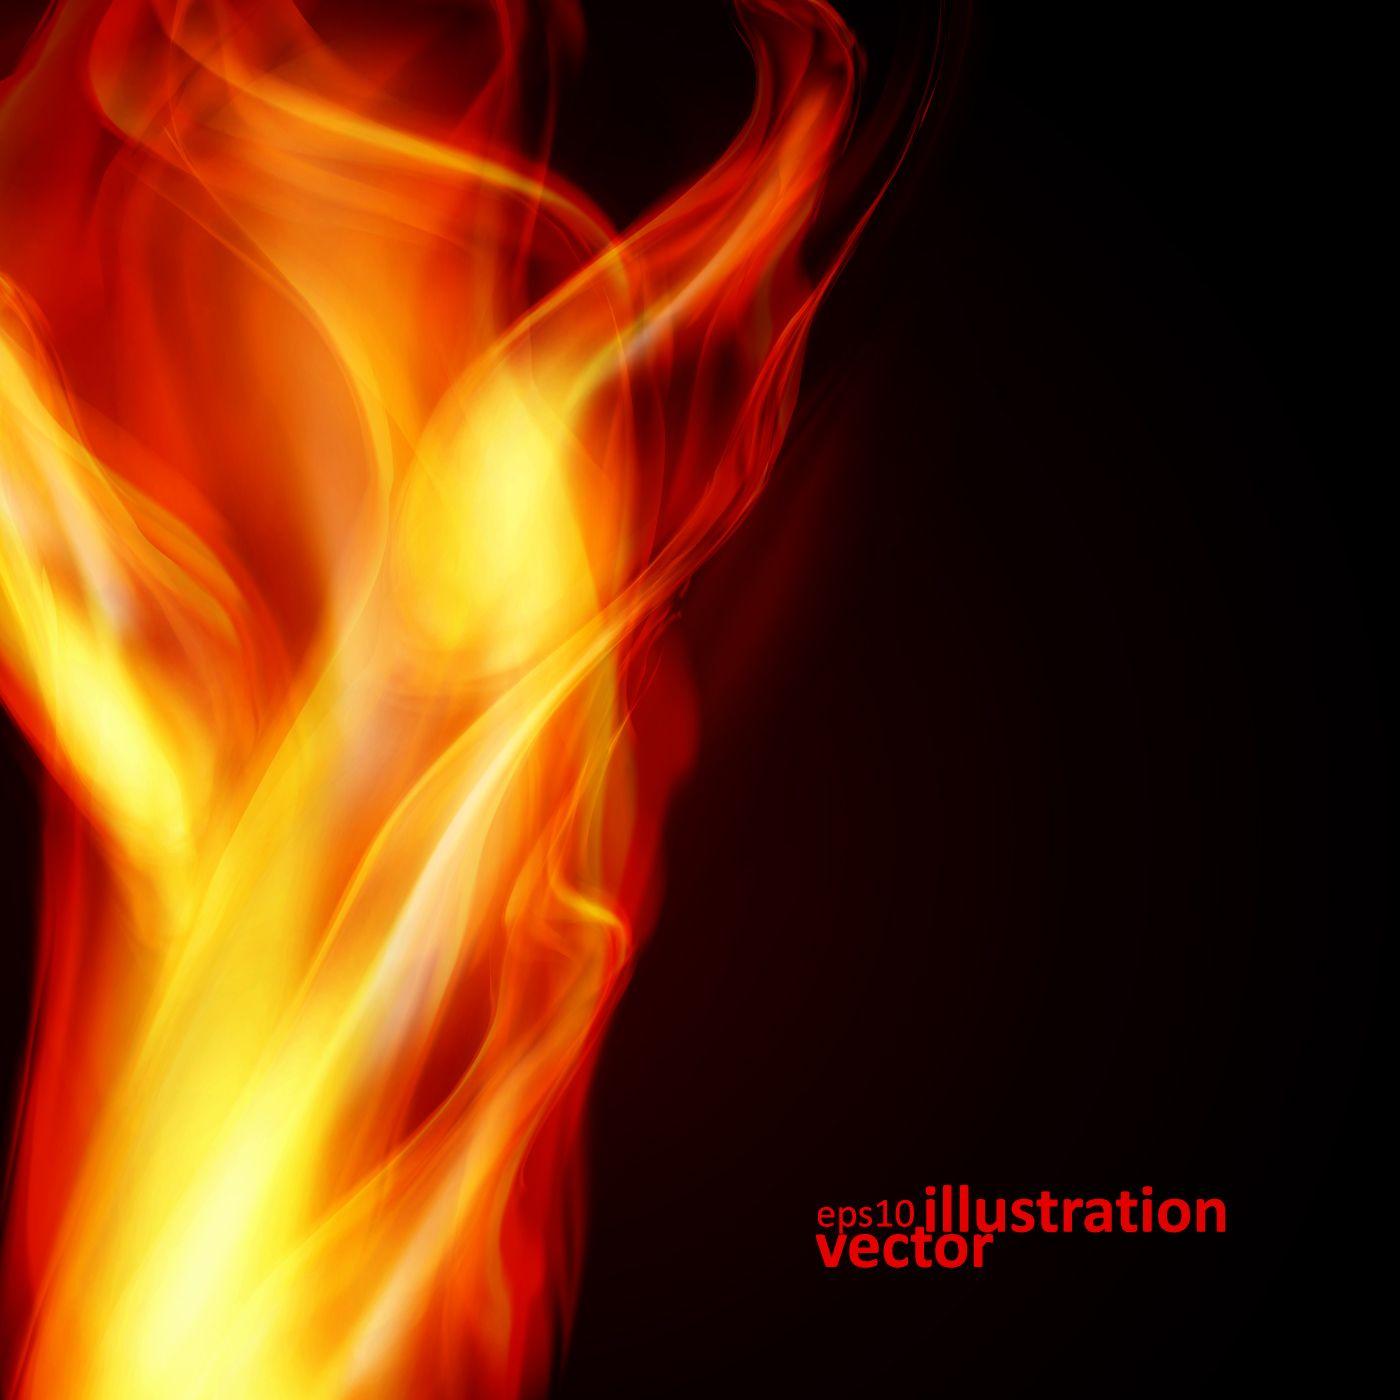 Realistic fiery background illustration vector 02 free download